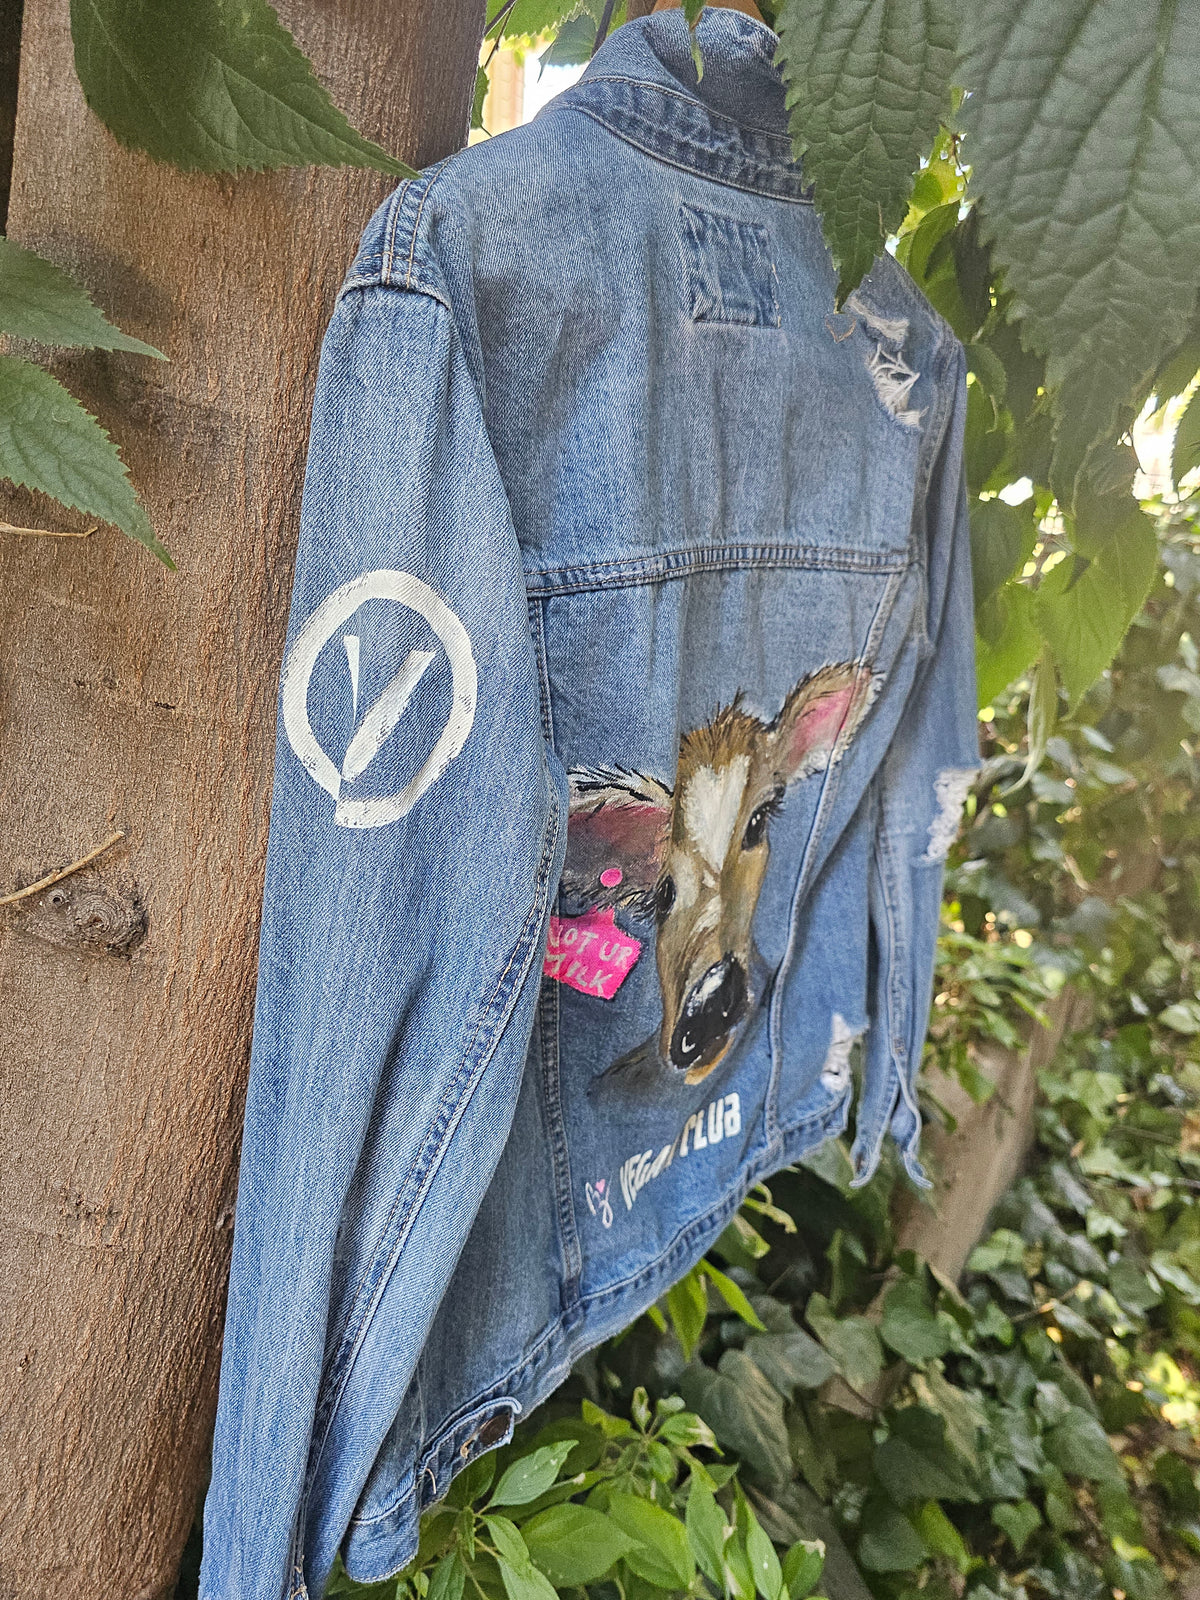 SOLD - Brandi Jae Collab Jean Jacket feat a Baby Cow with Tag